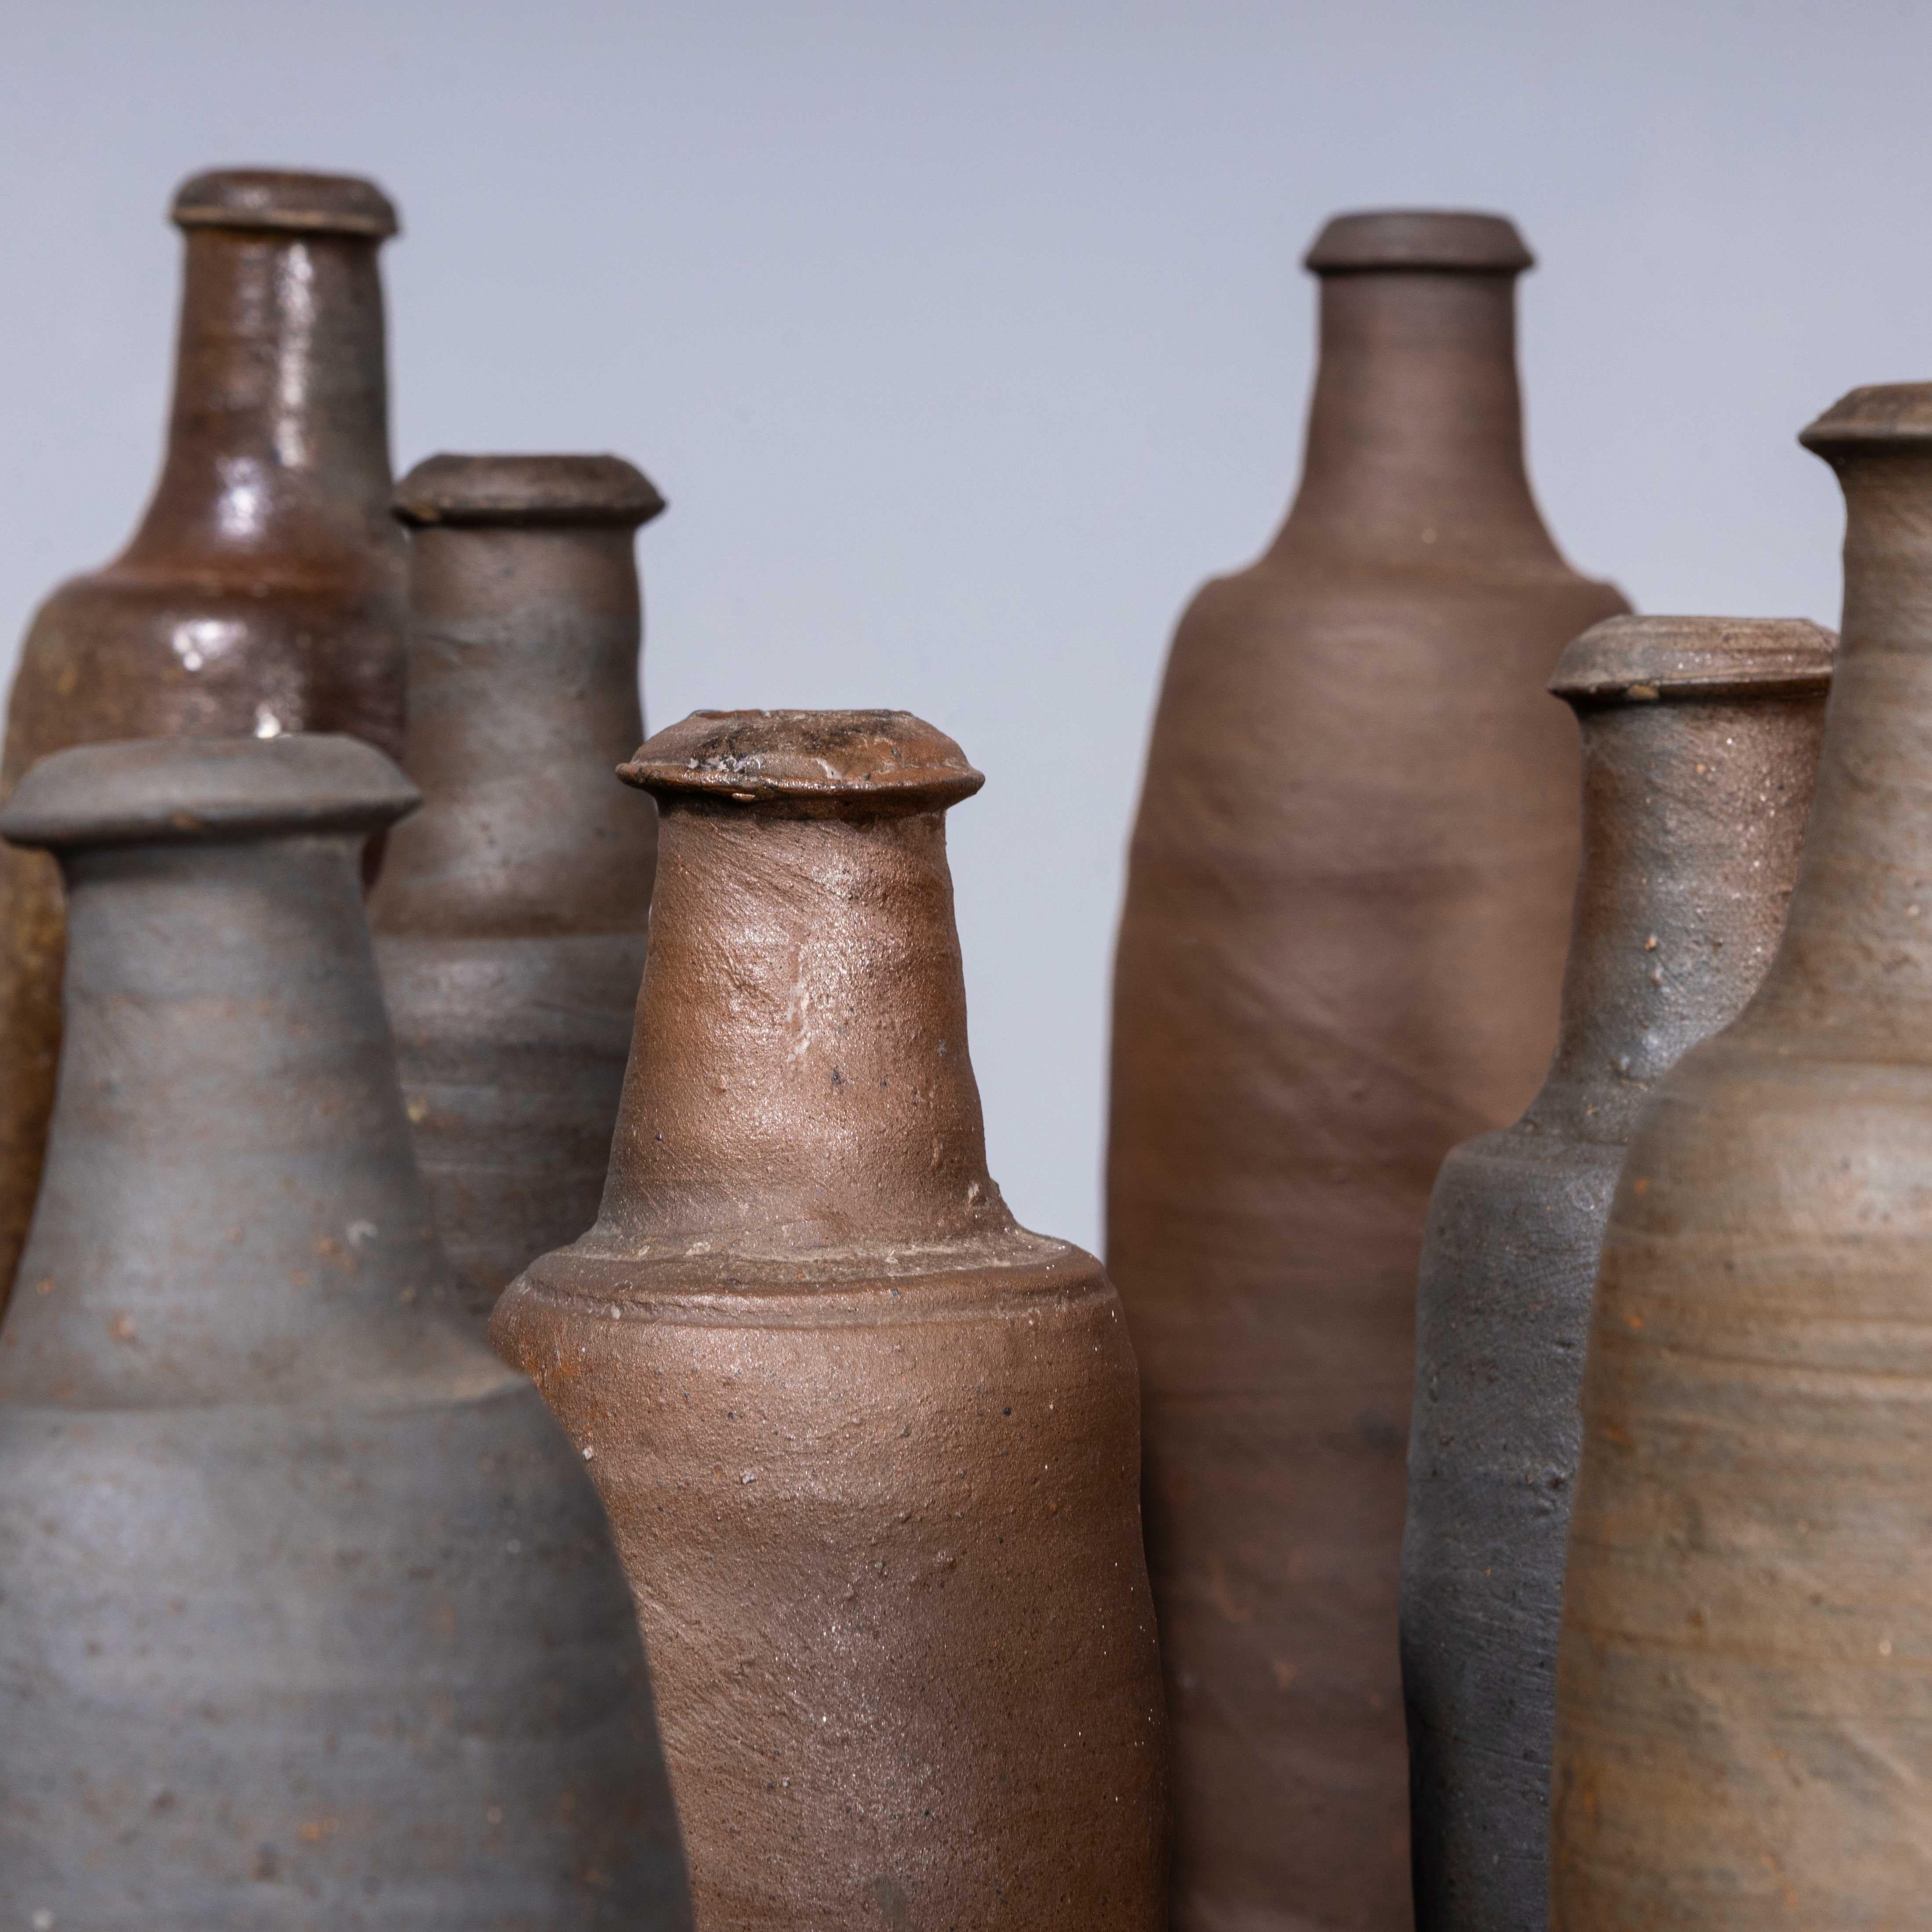 19th Century French Stoneware Bottles
19th Century French Stoneware Bottles. An Exceptional collection of original 19th Century French stoneware bottles, hand made. We have a collection of over twenty, but the listing is for one single bottle.